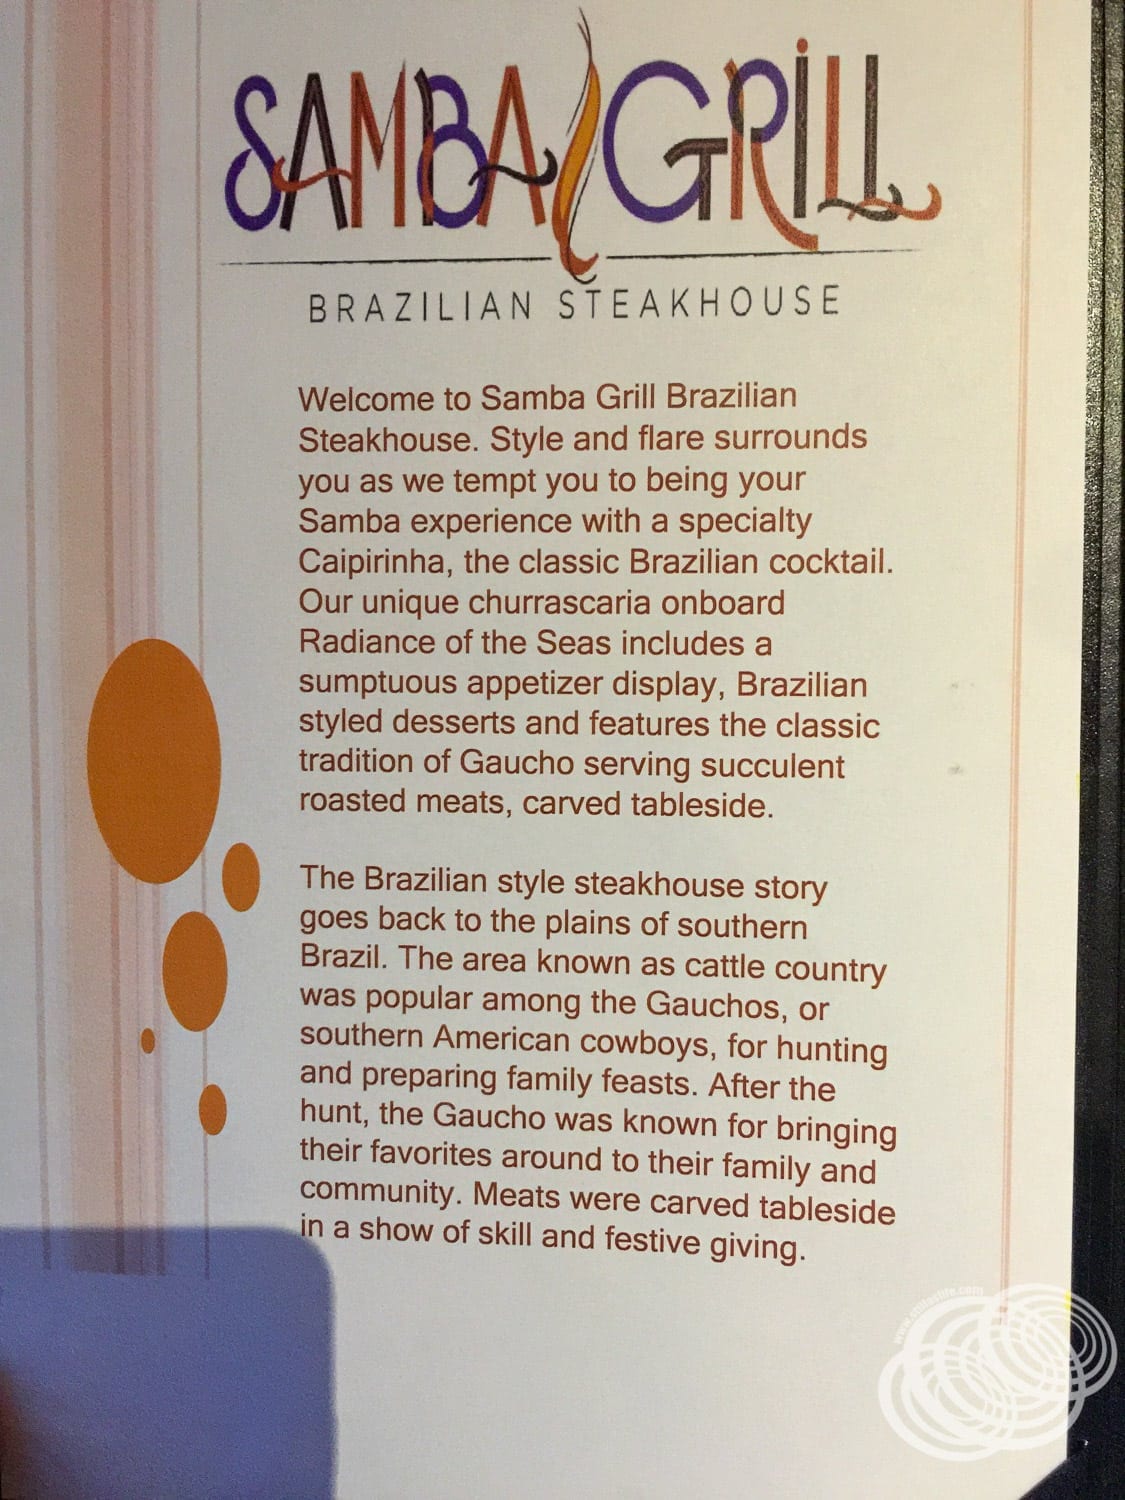 About Samba Grill - From the men